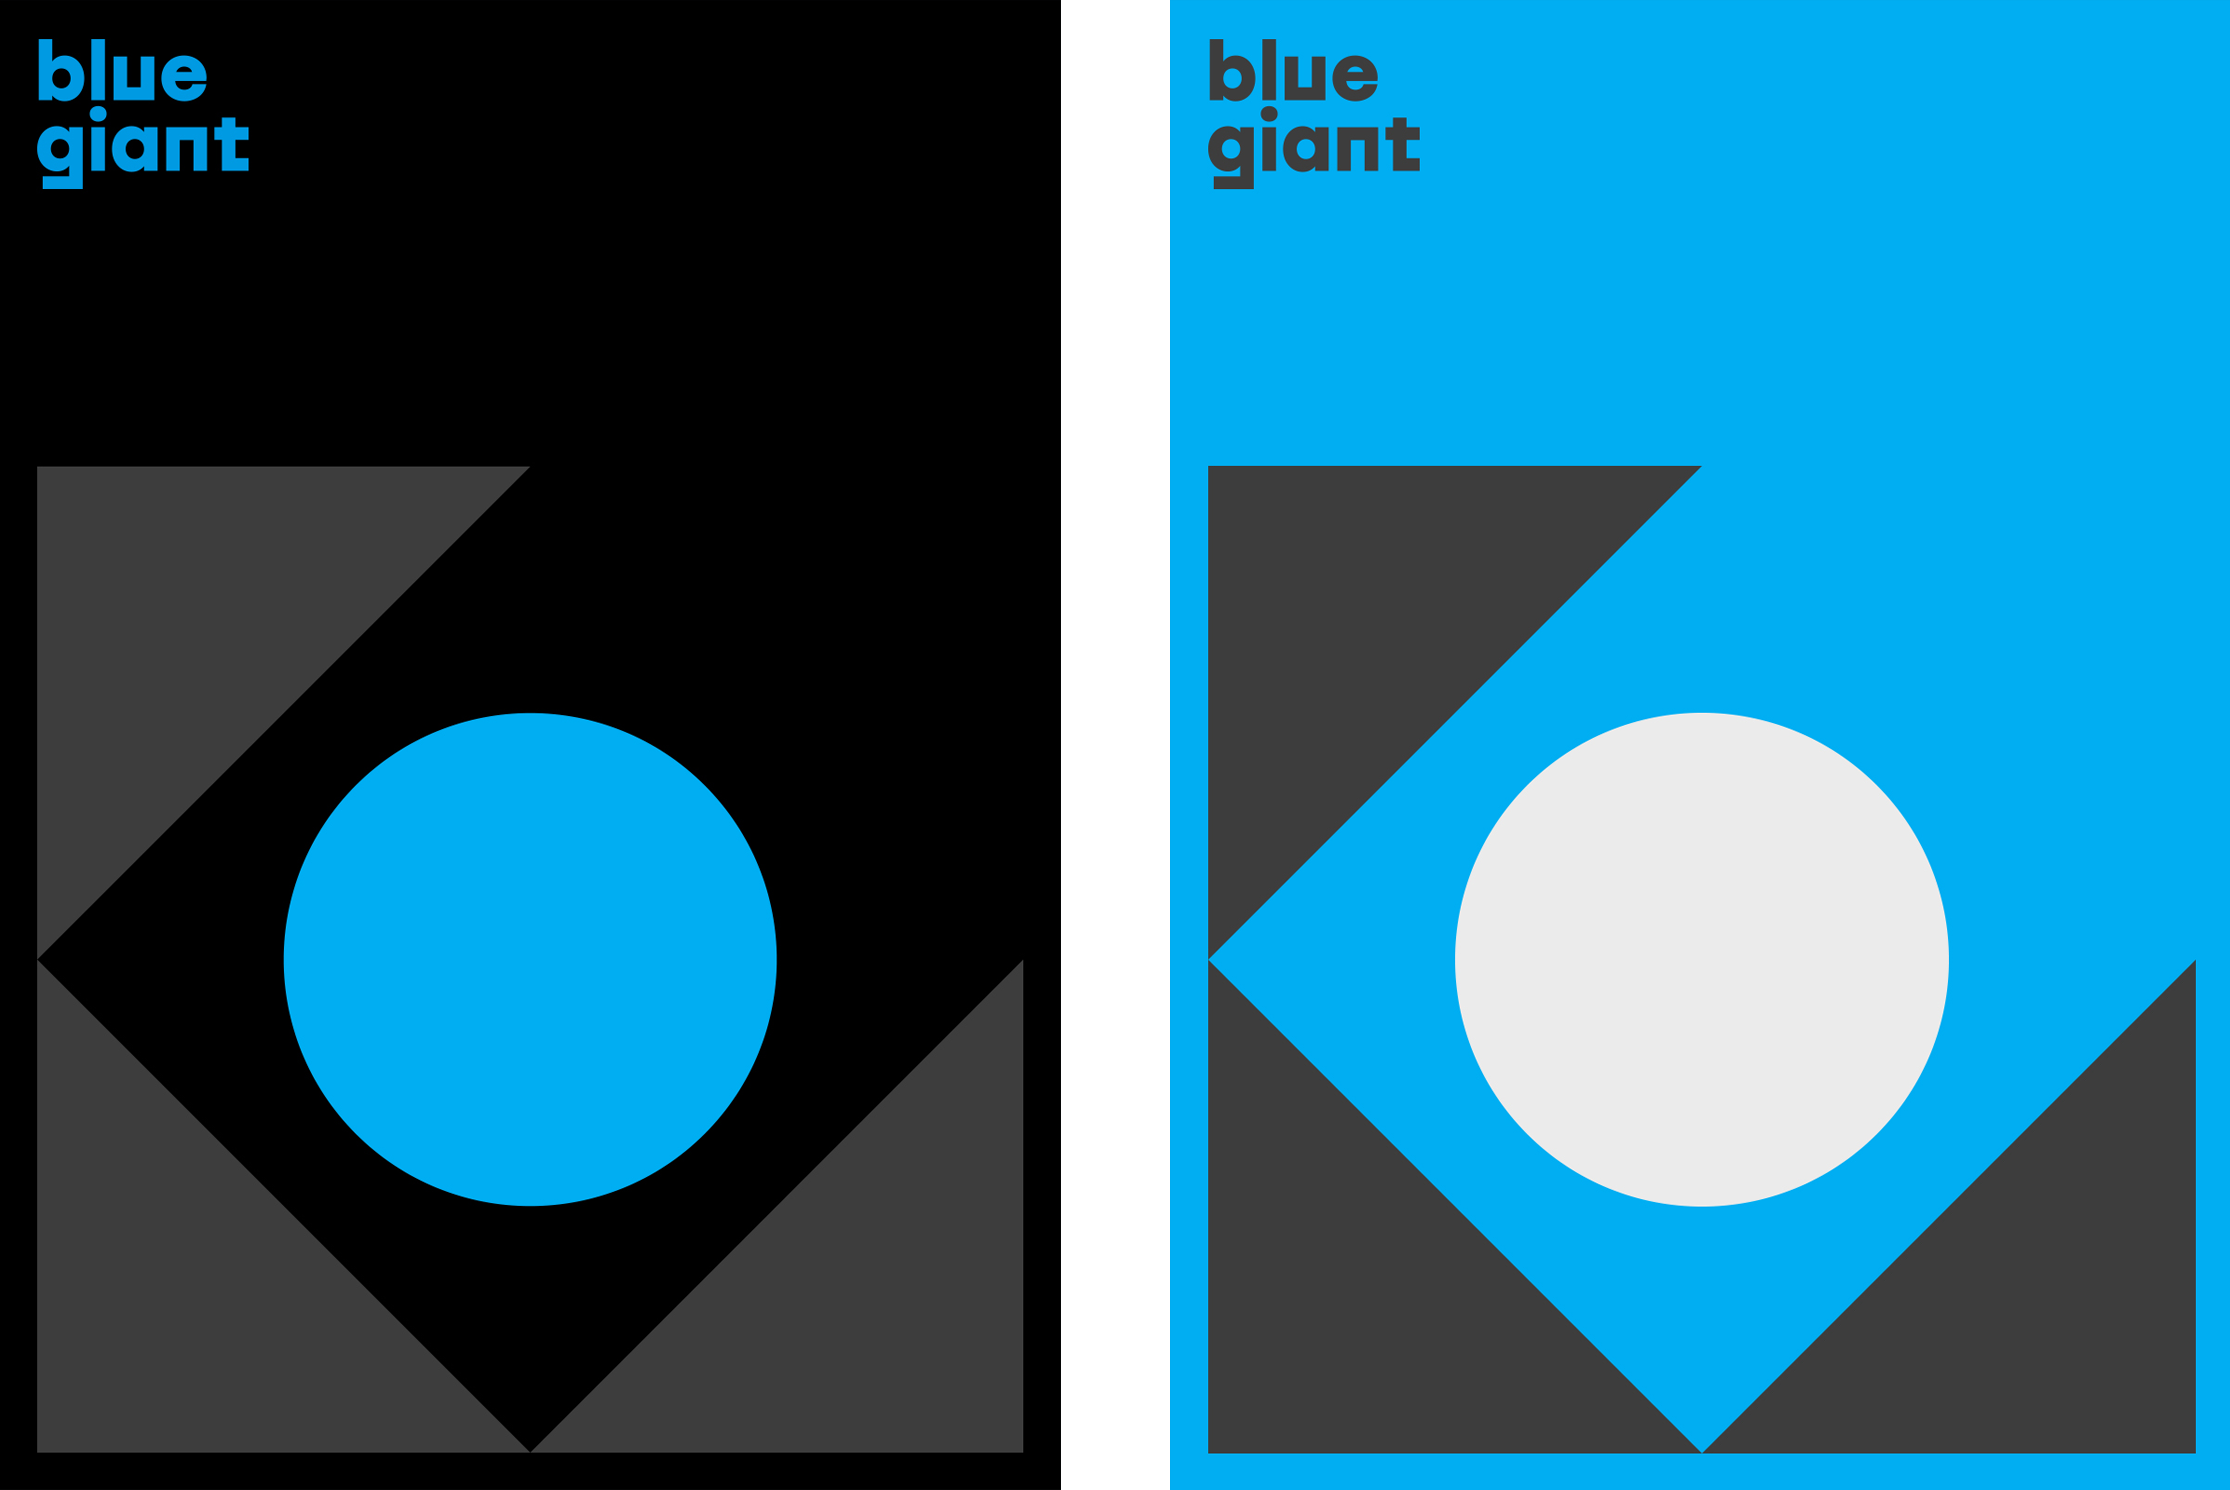 bluegiant posters in black and cyan using big logo on bottom